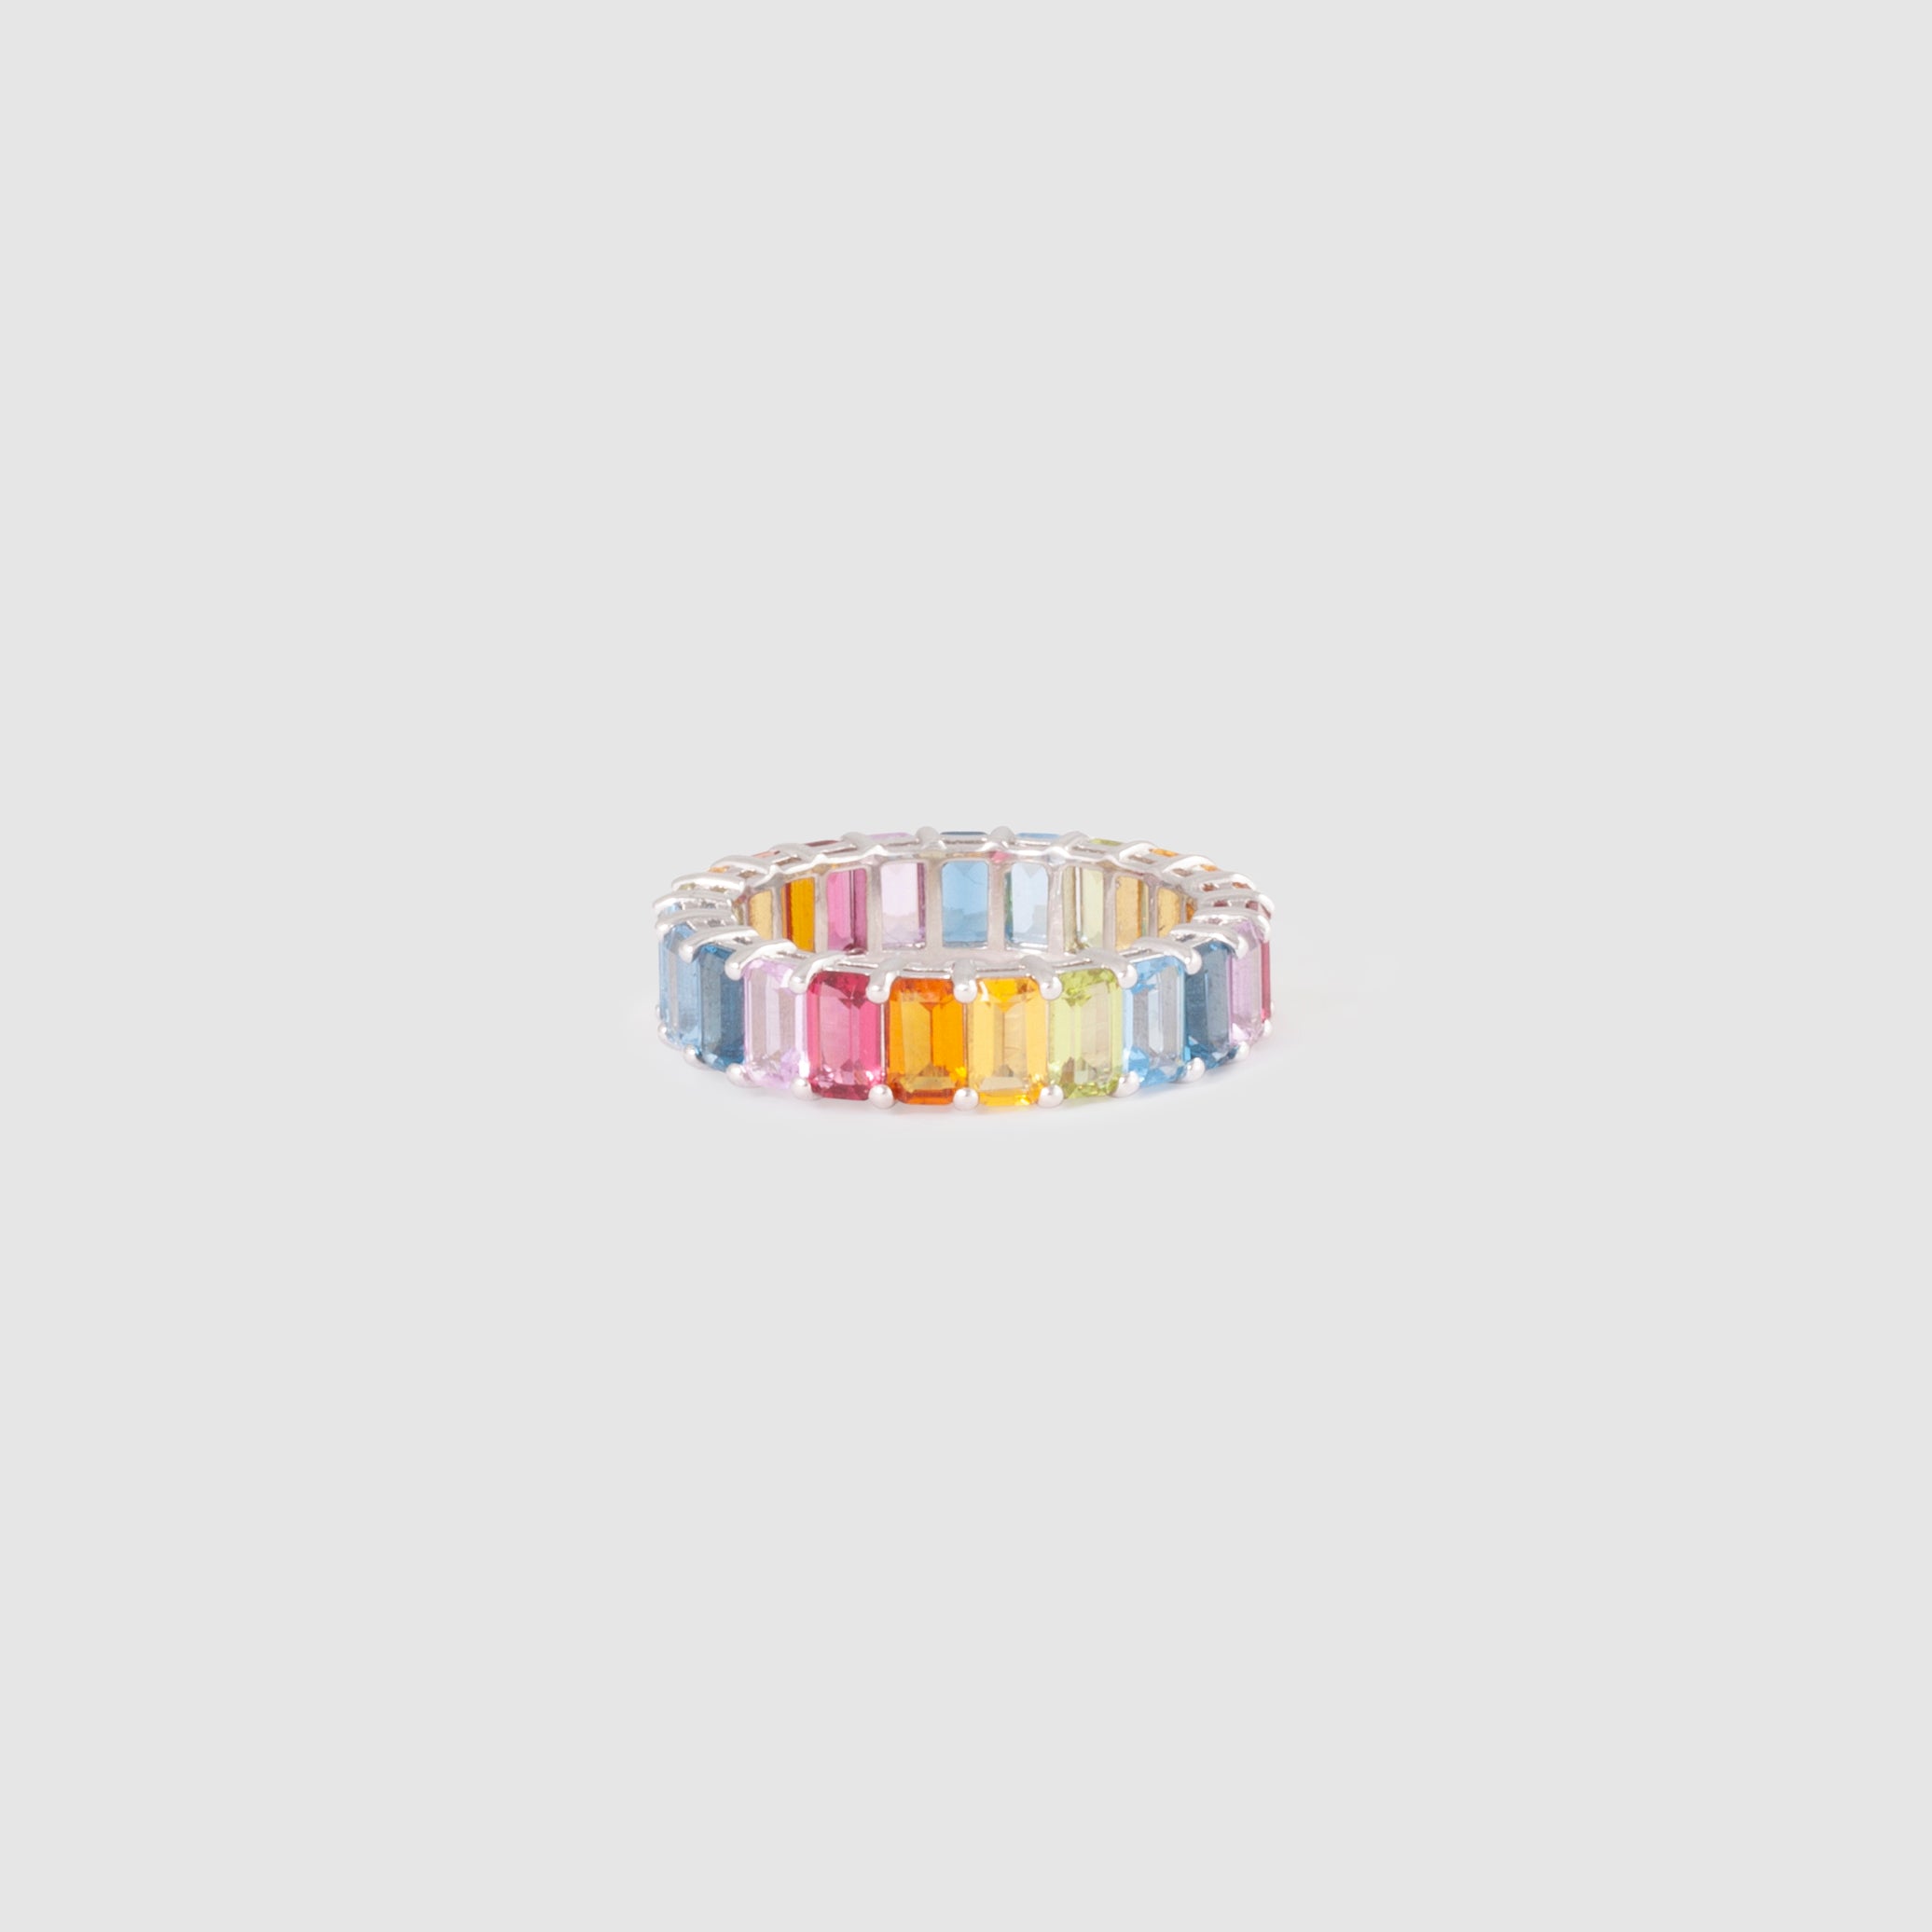 Ring featuring rainbow-coloured baguette stones set in a simple band